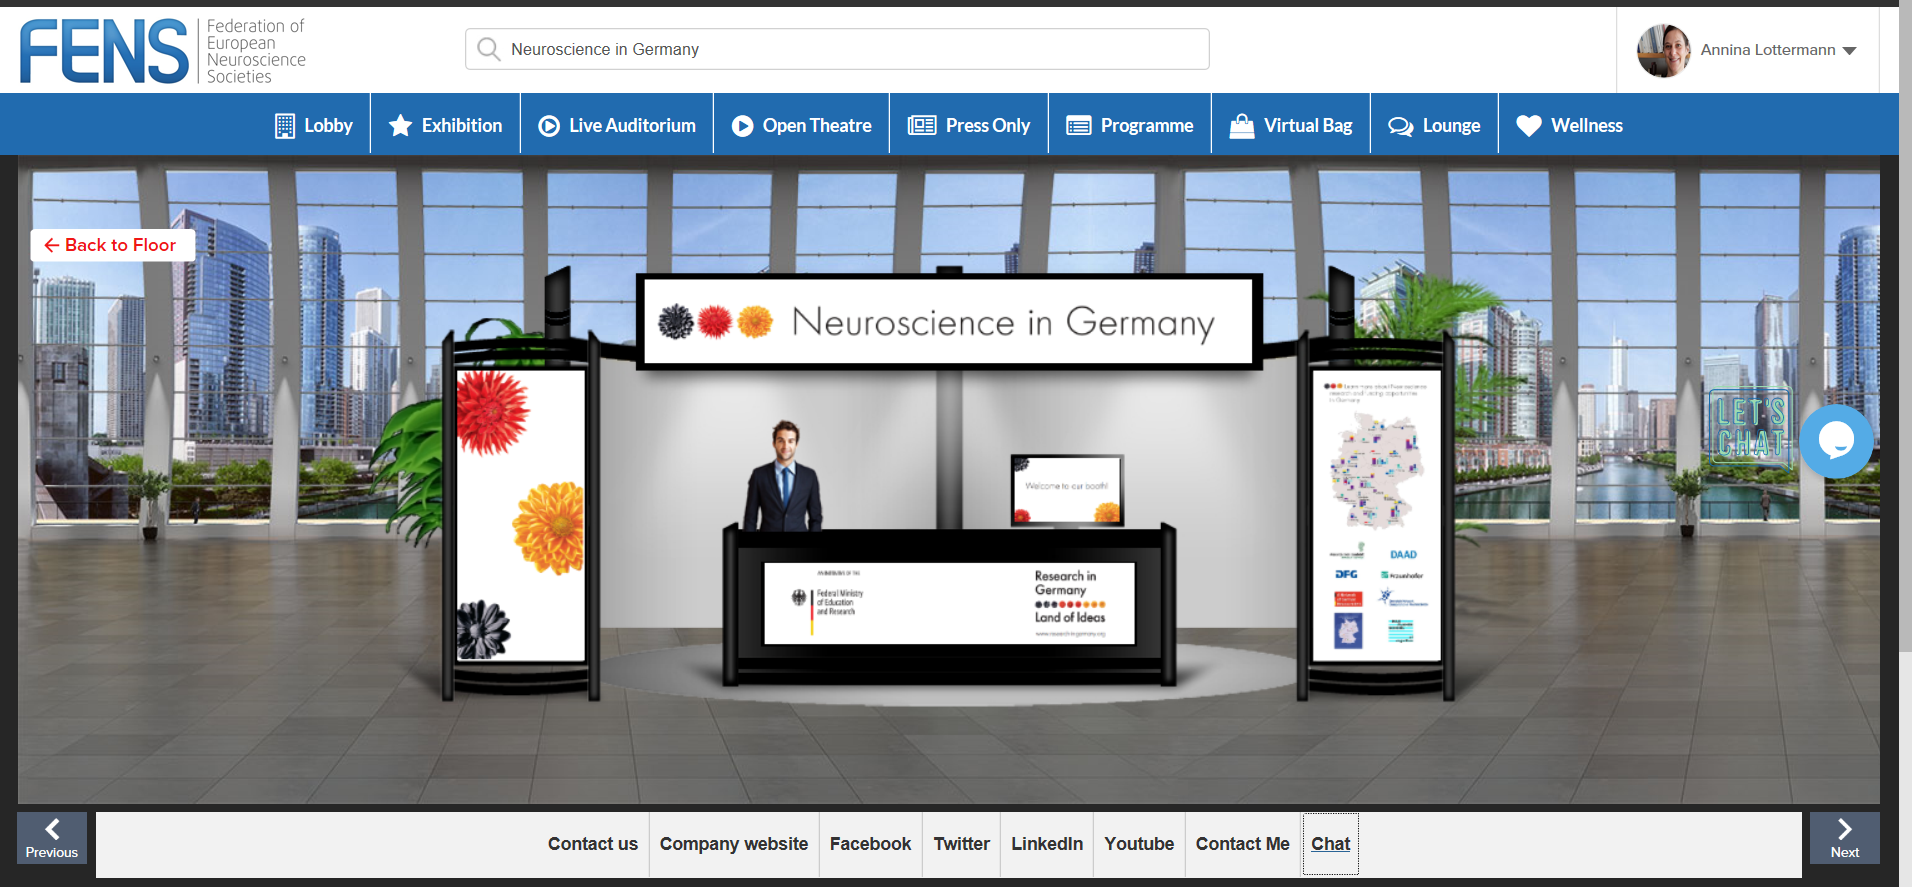 Virtual “Research in Germany” exhibition booth at the neuroscience conference FENS 2020